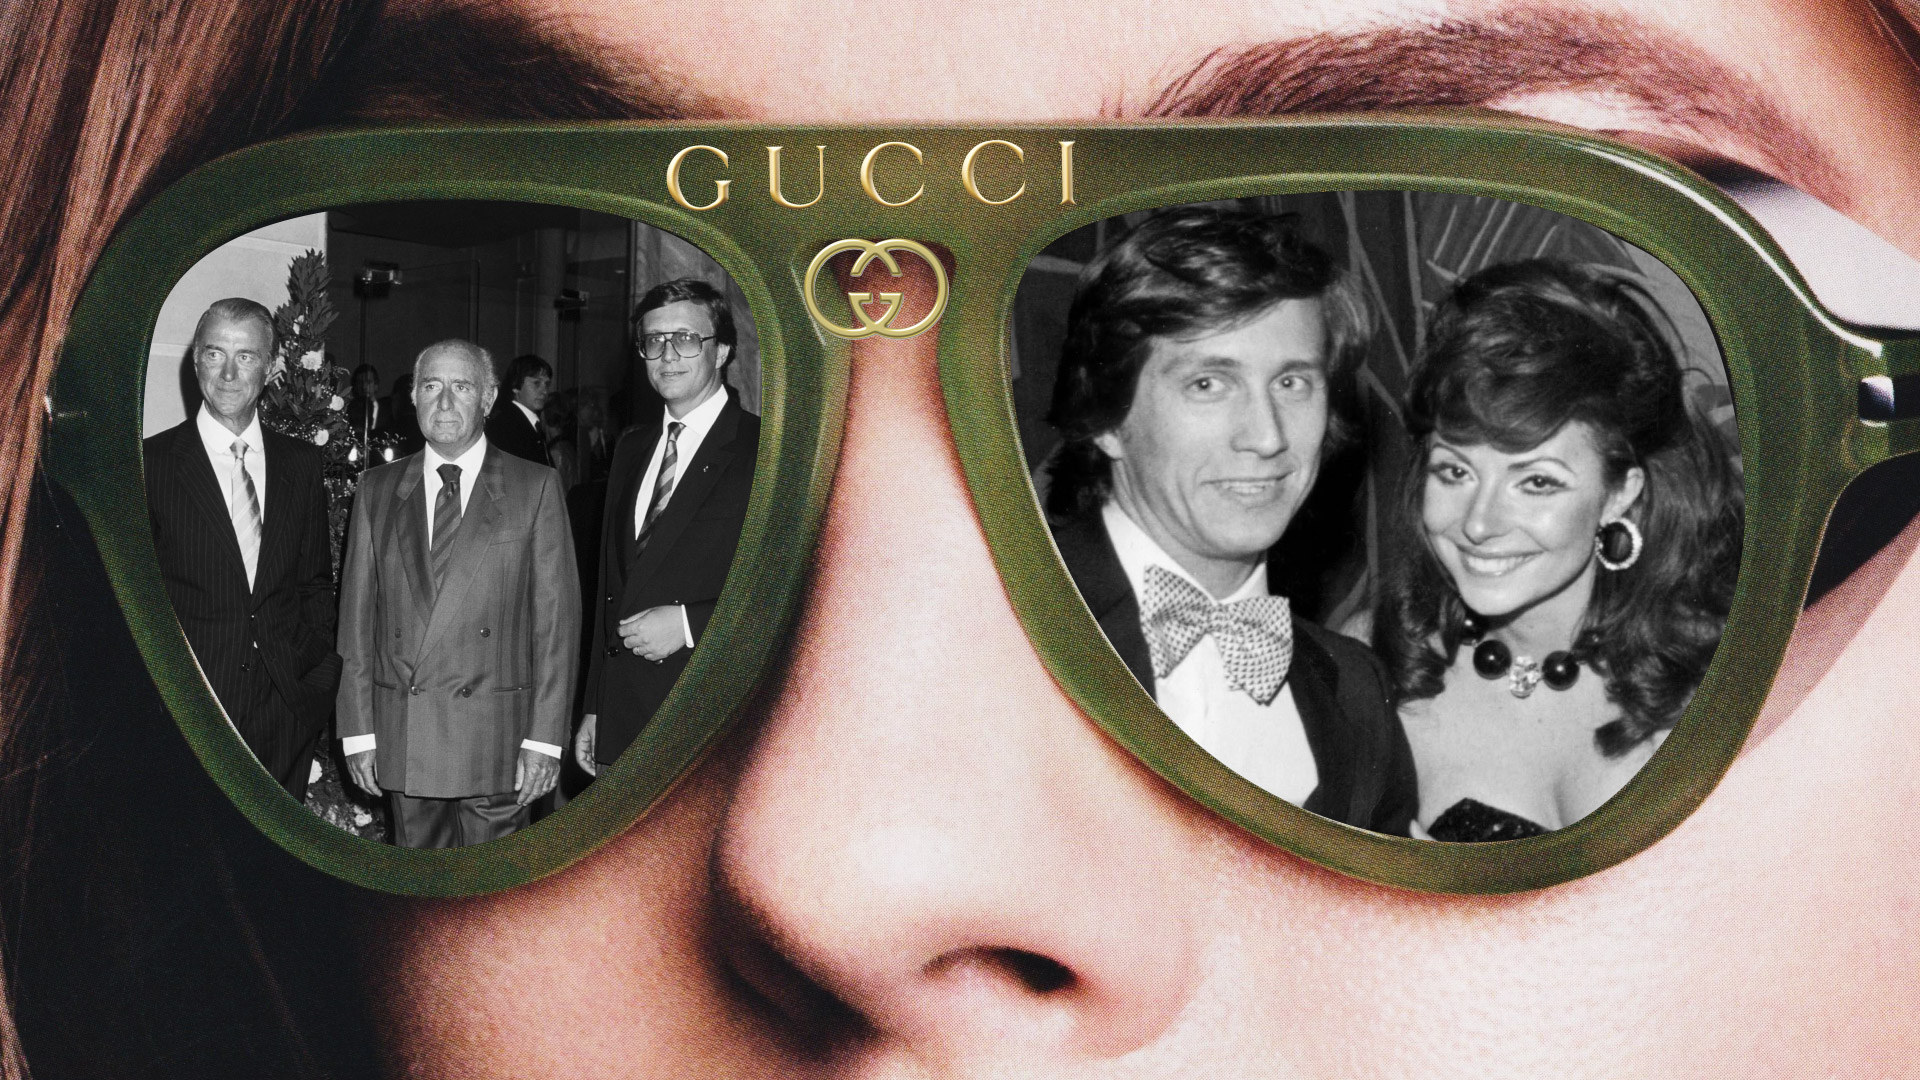 The real story behind House of Gucci